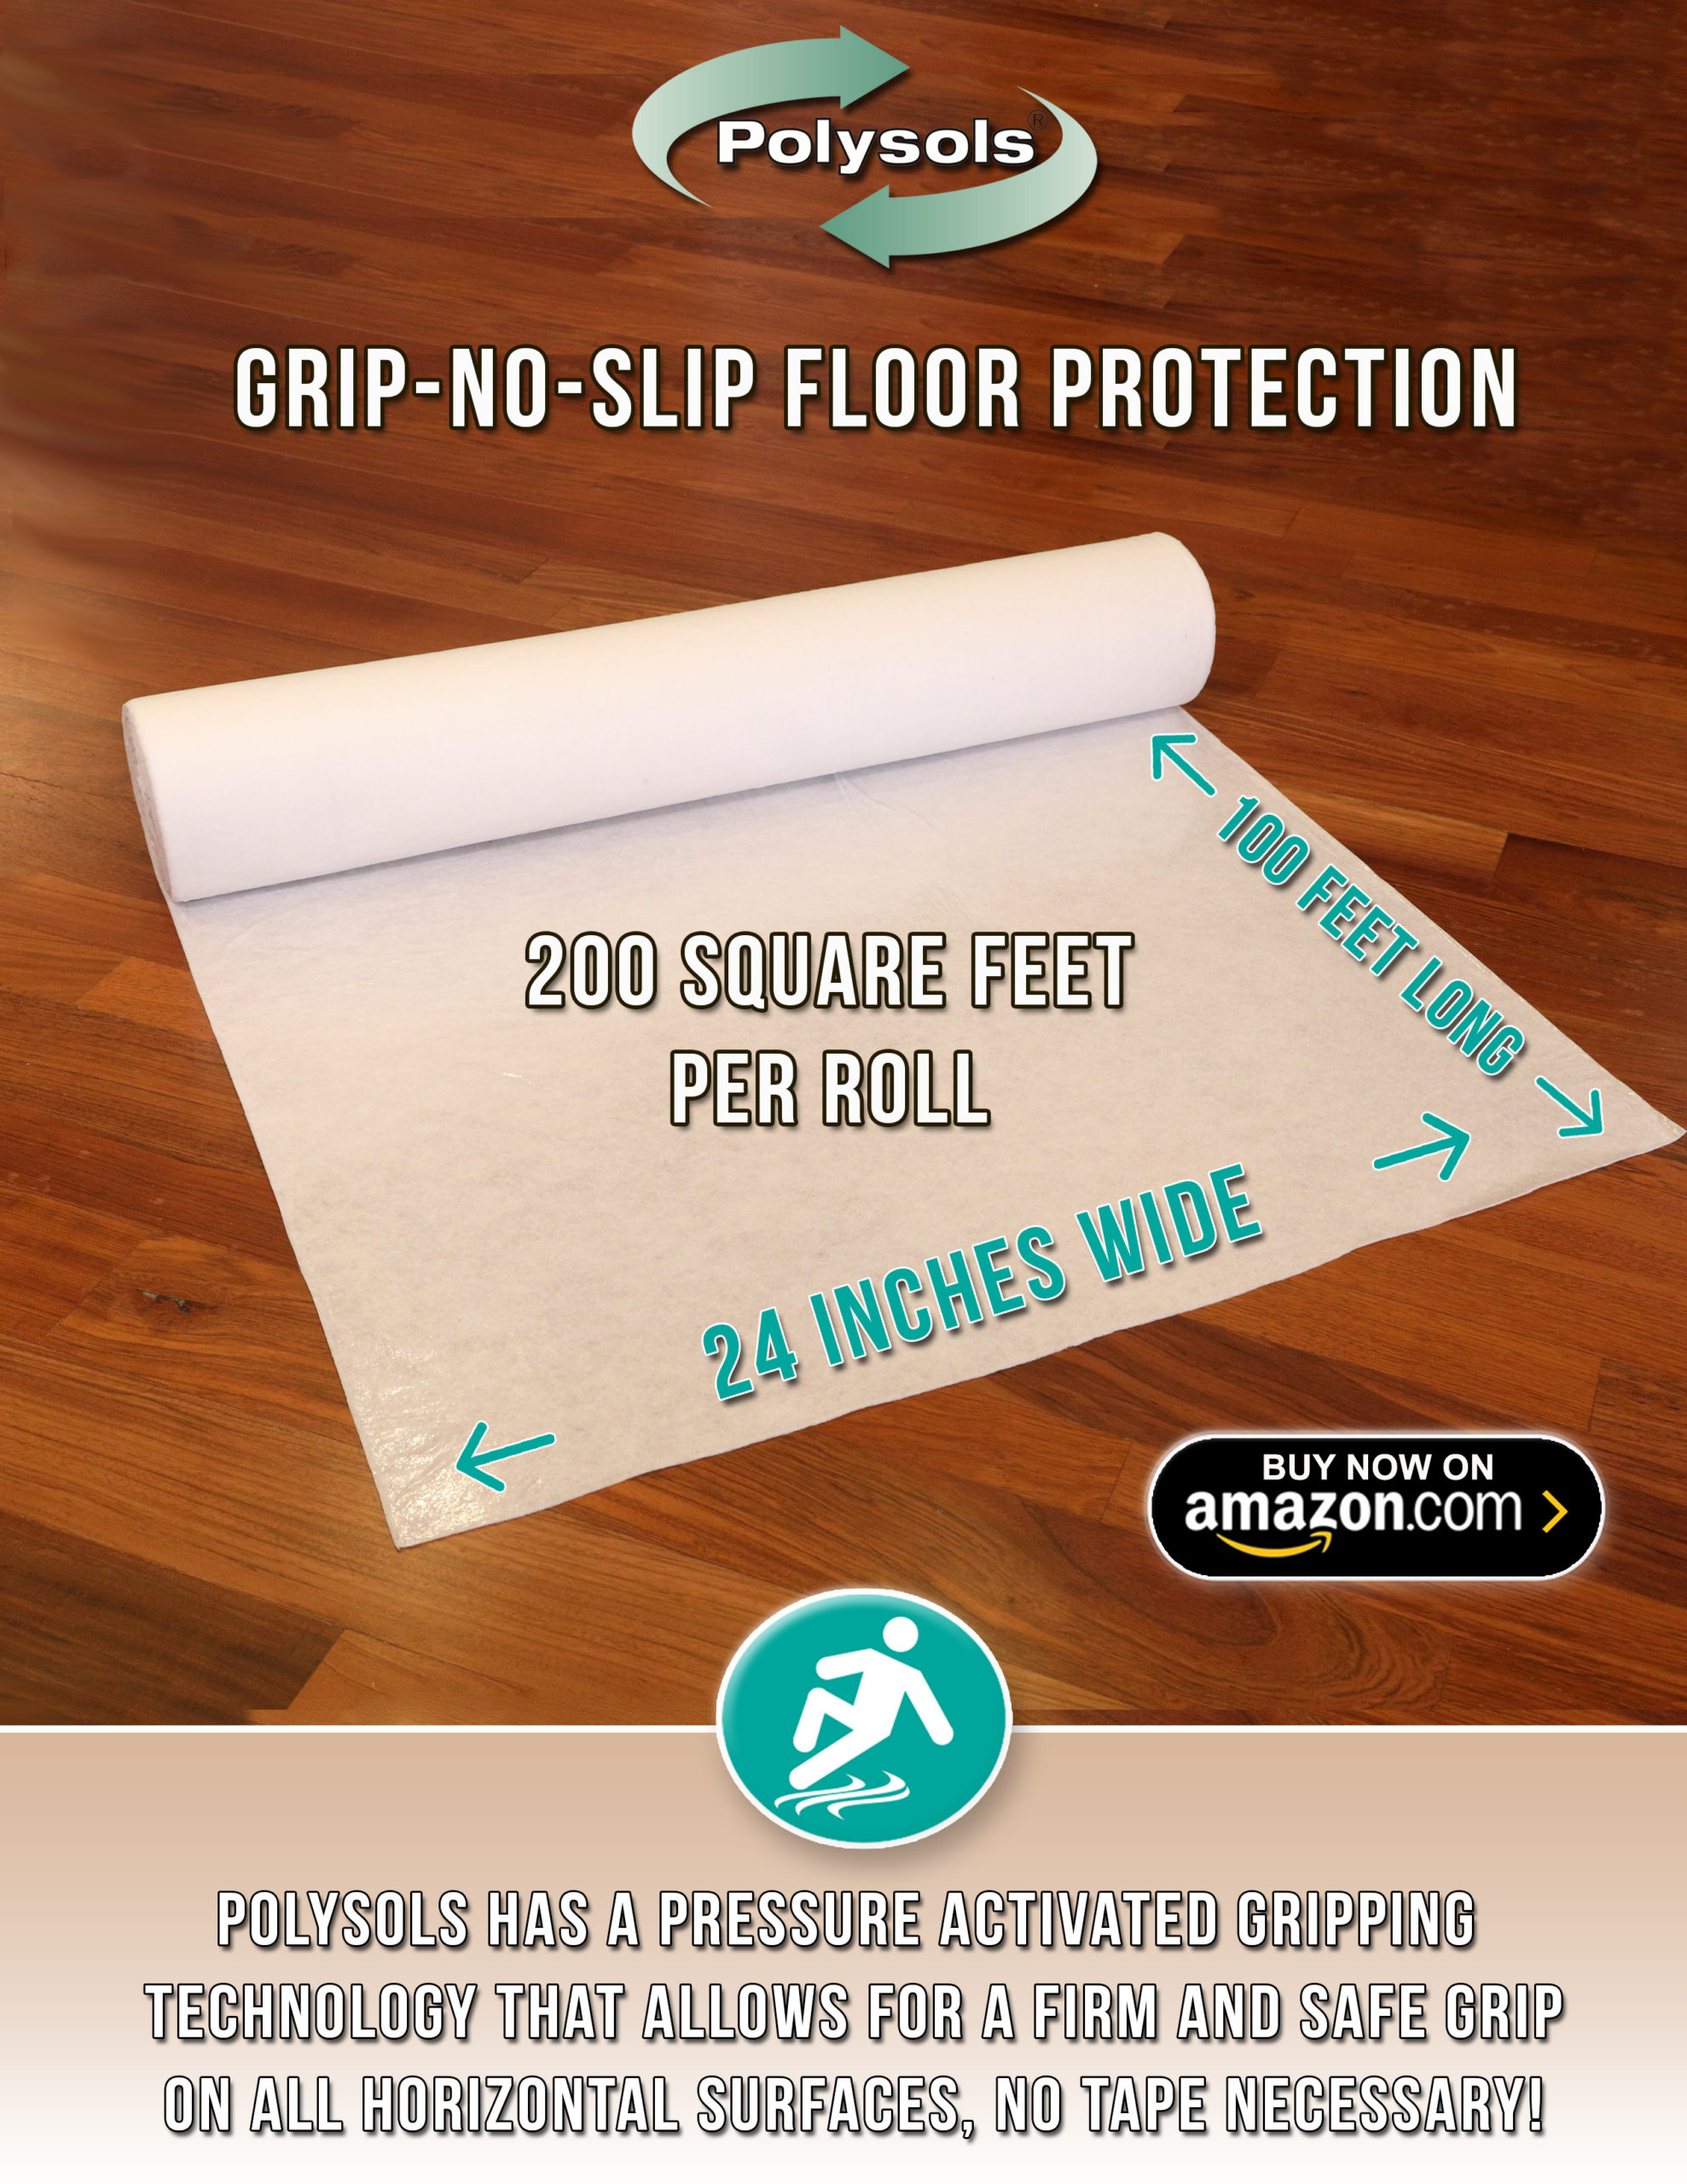 Polysols Heavy Duty Floor Film- Self Adhesive- Floor Protection for Hardwood Floors and Tile. Made in USA. Polysols Floor Film and plastic sheeting heavy duty for construction and DIY projects. Polysols 24 inch Floor Covering by 100 Feet Long.